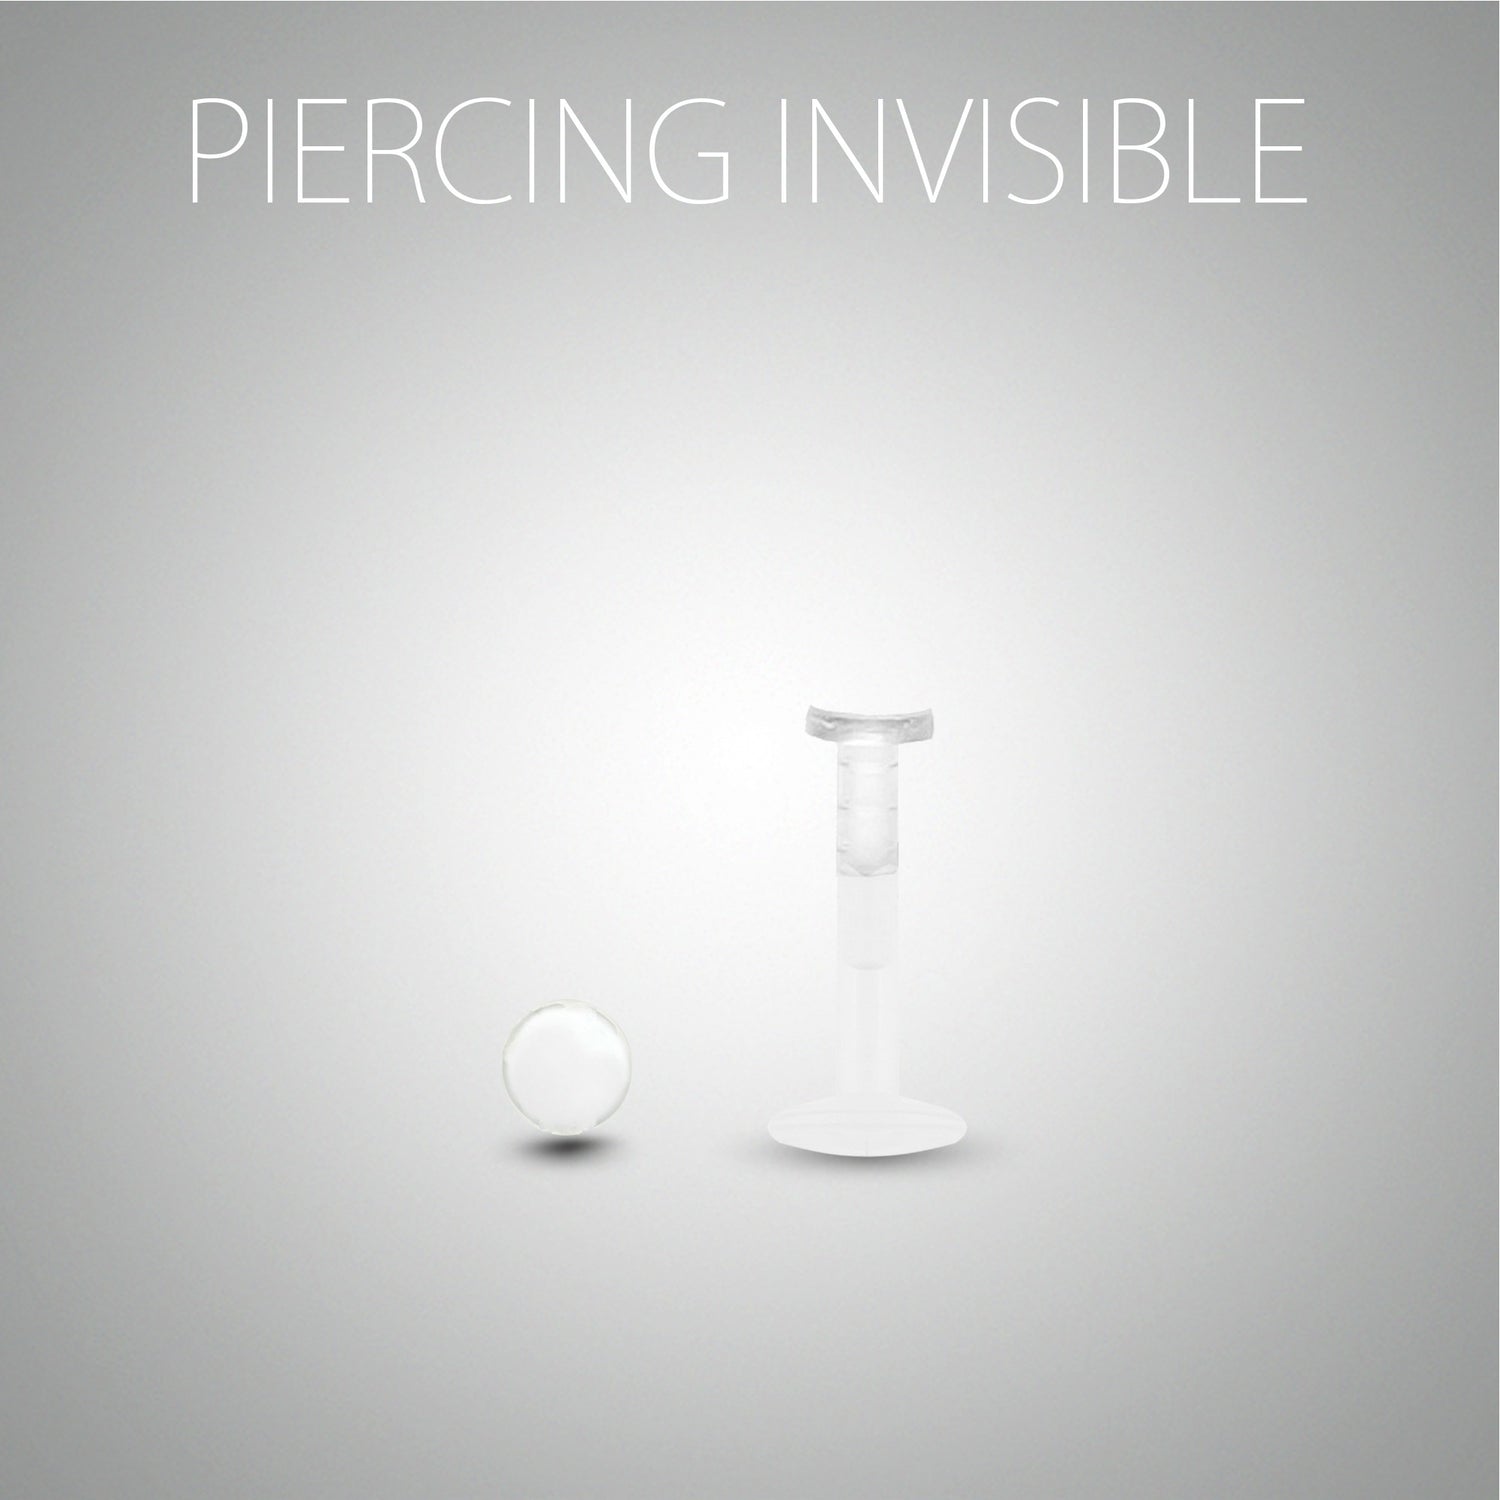 Piercing invisible